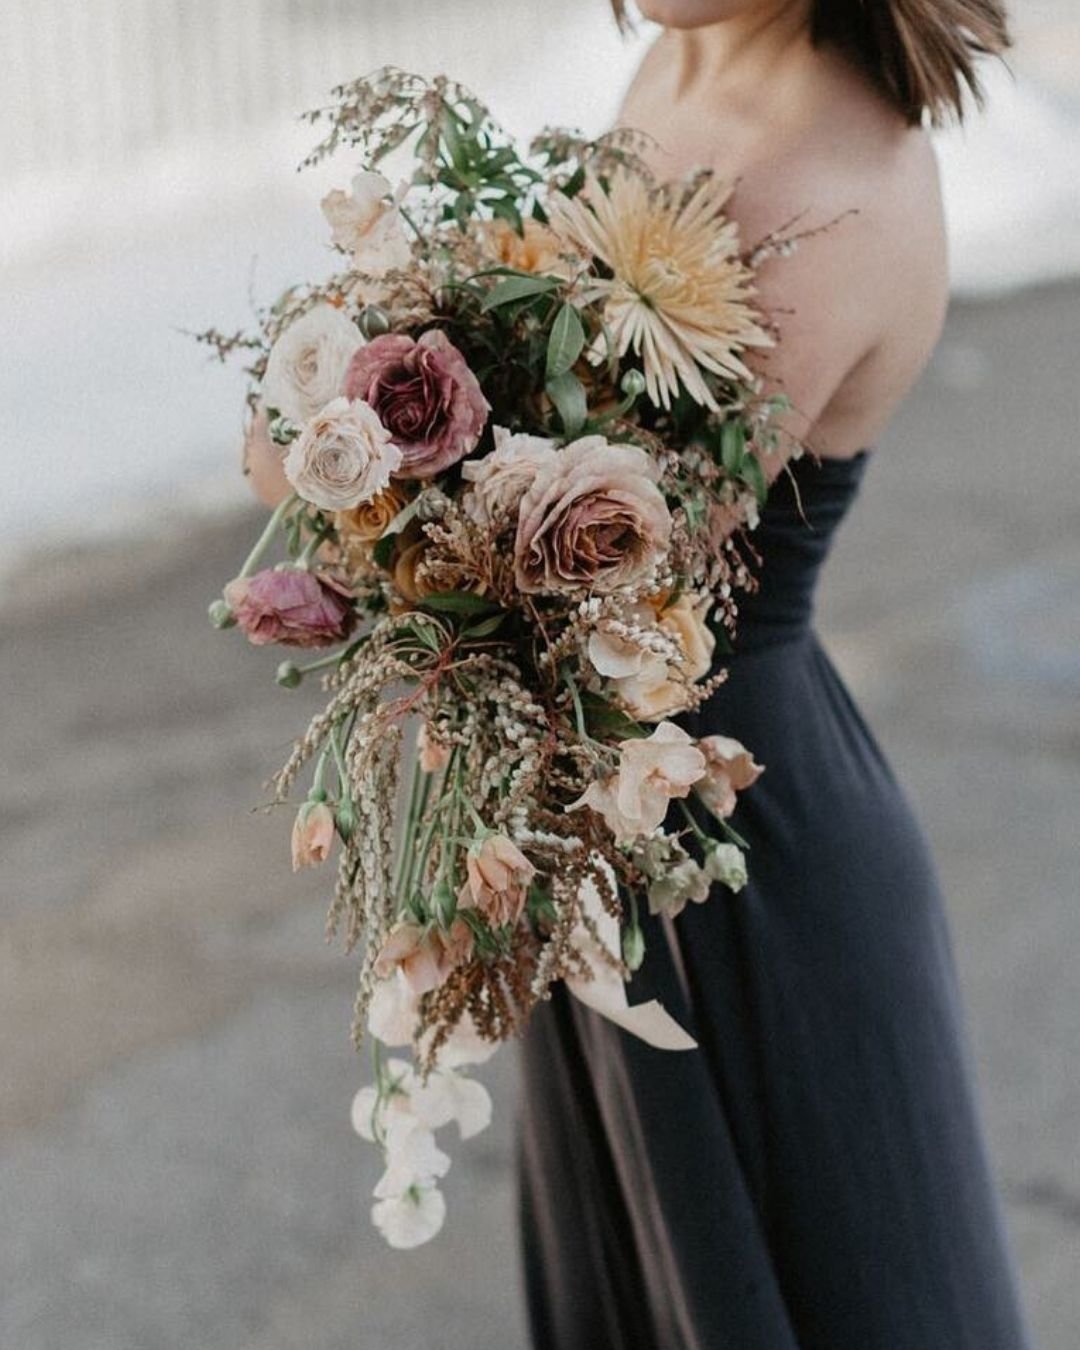 how to preserve wedding bouquet in classic style